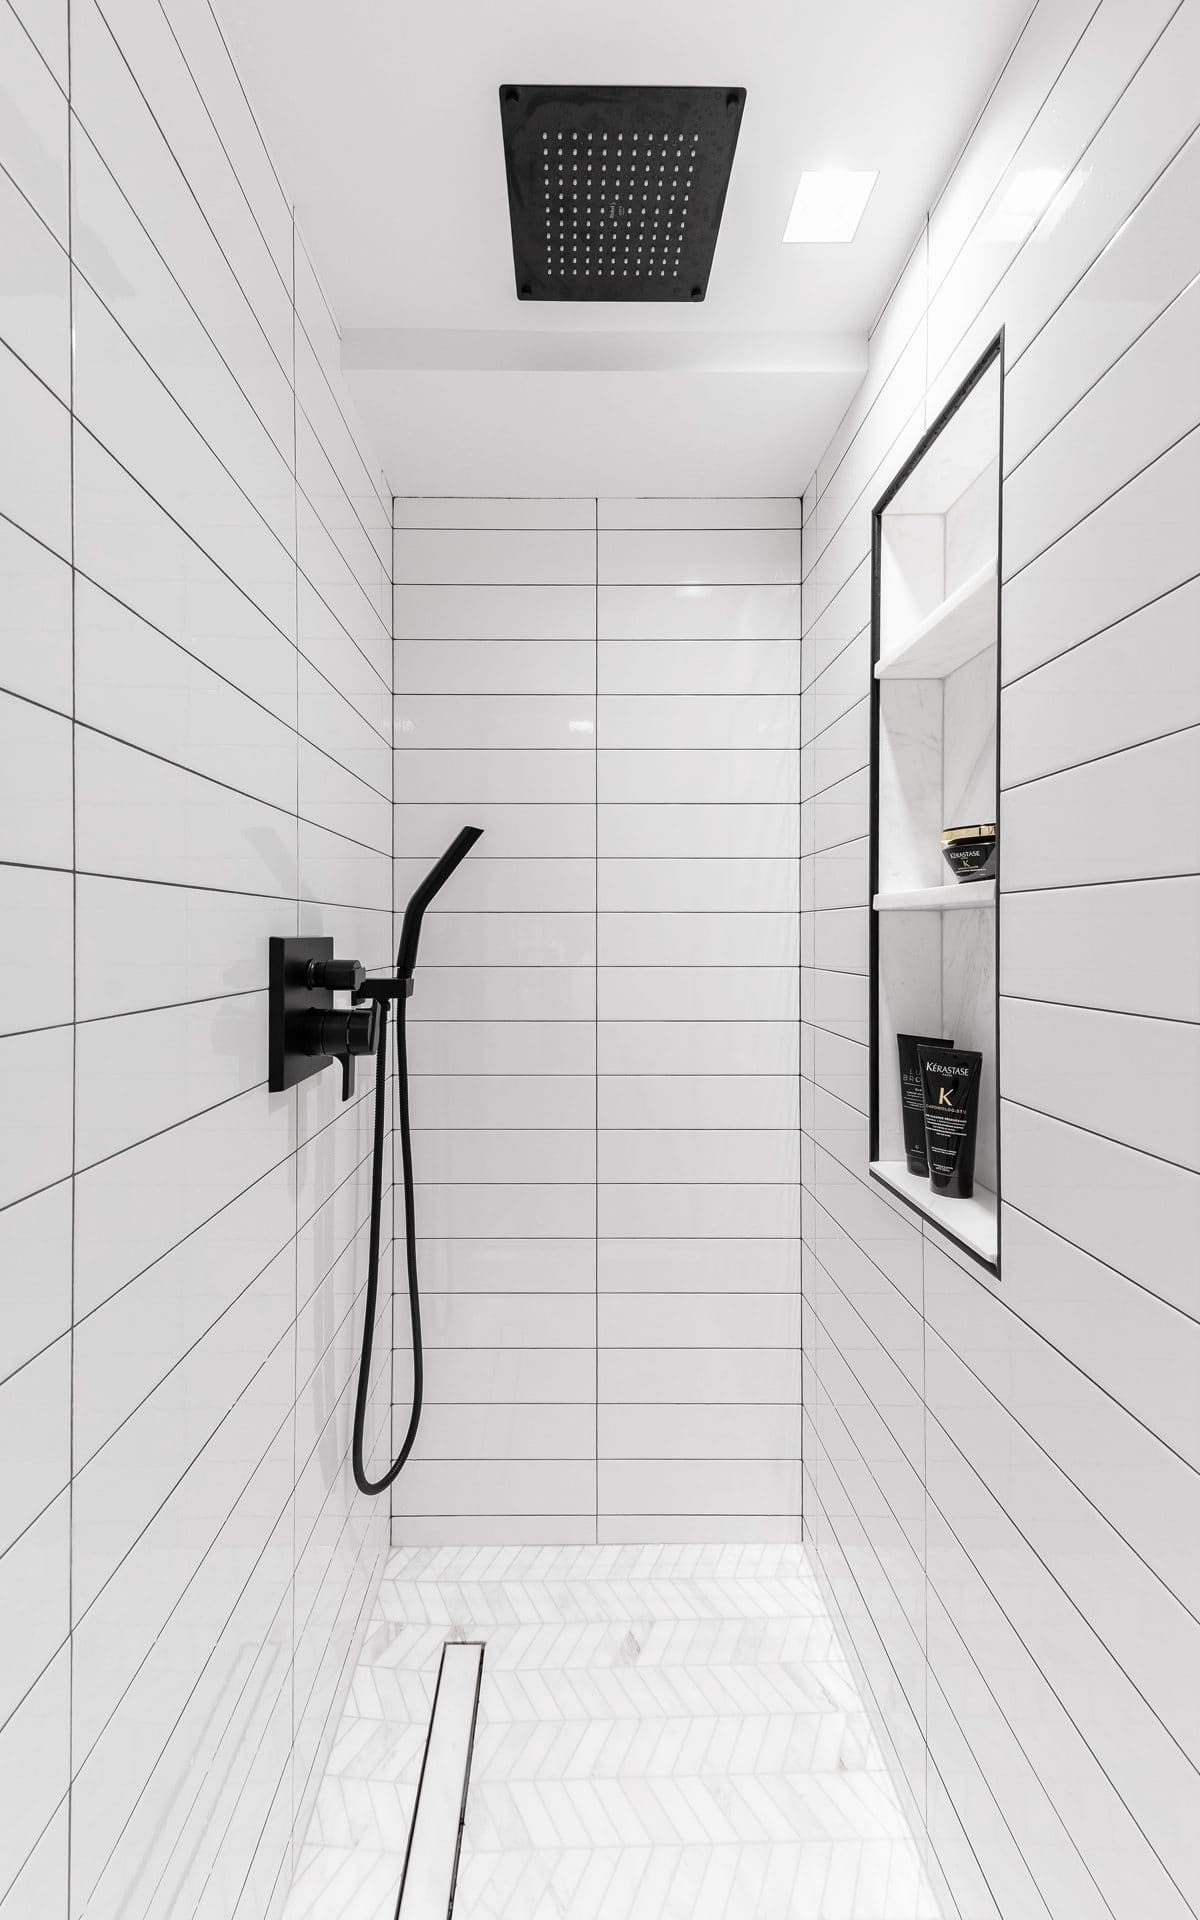 Modern custom shower features white subway tiles and dramatic black luxury fixtures and accents.